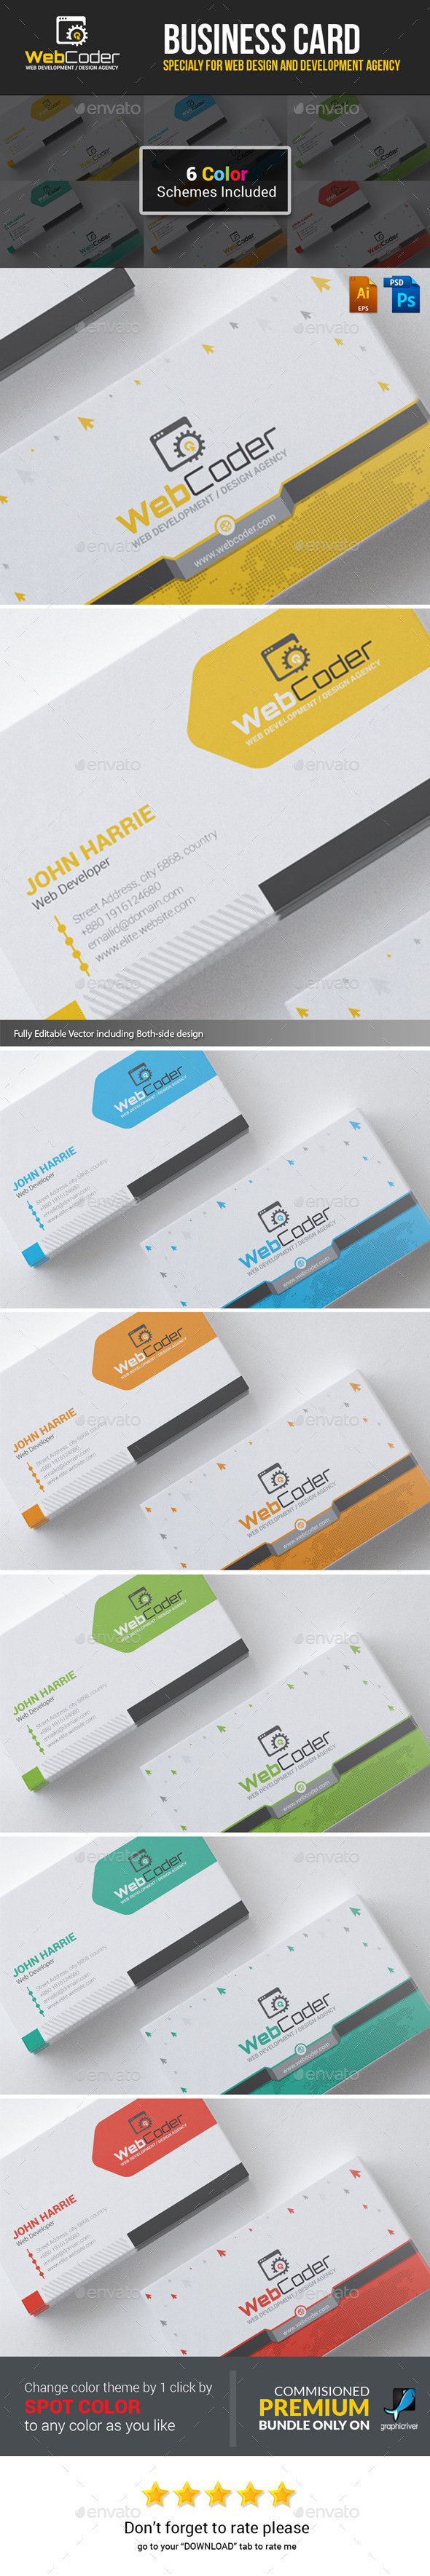 Web coder web design and web development agency company business card image preview